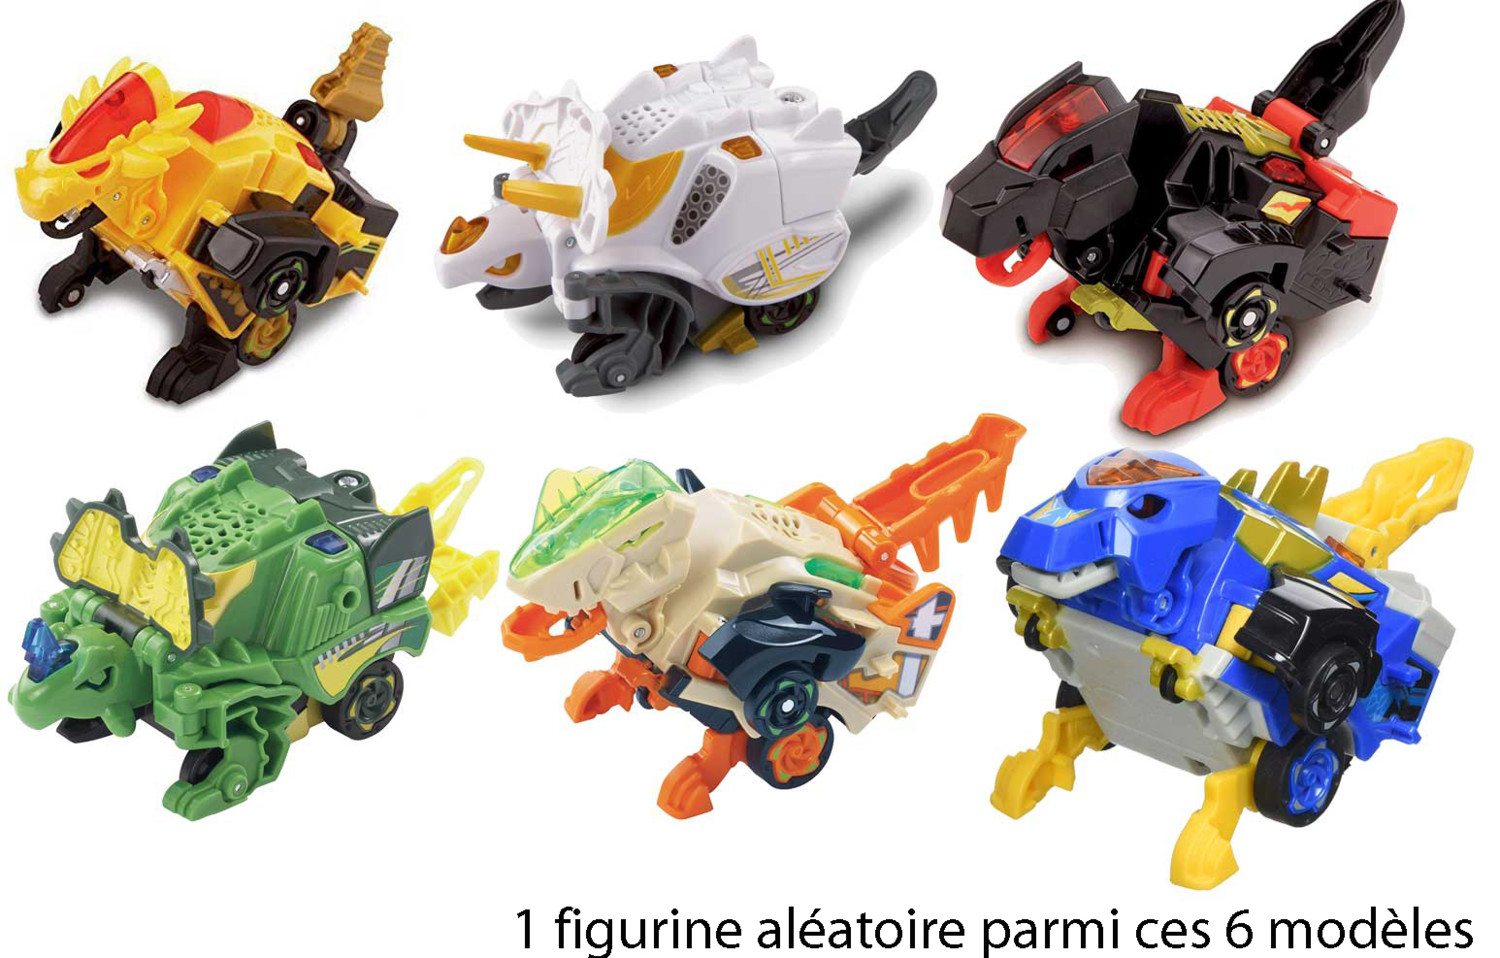 https://content.pearl.fr/media/cache/default/article_ultralarge_high_nocrop/shared/images/articles/K/KT9/1-figurine-switch-go-dinos-turbo-modele-aleatoire-ref_KT9335_1.jpg